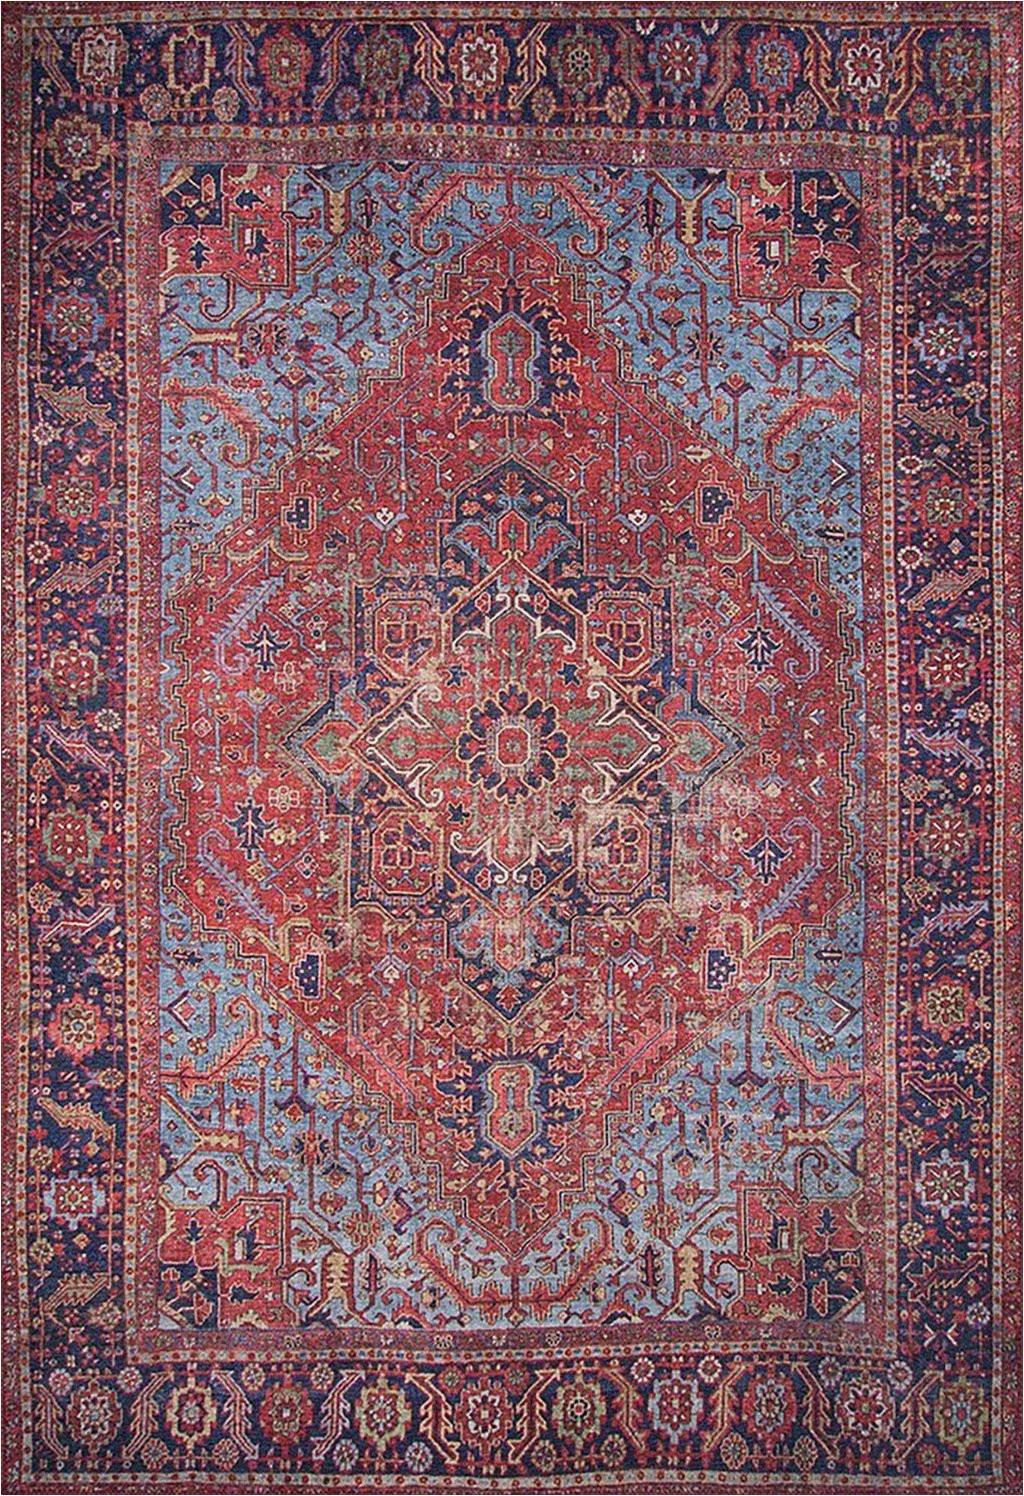 Brown and Blue Rugs for Sale Fame Rugs the Unique Luxury Rugs for Affordable Prices